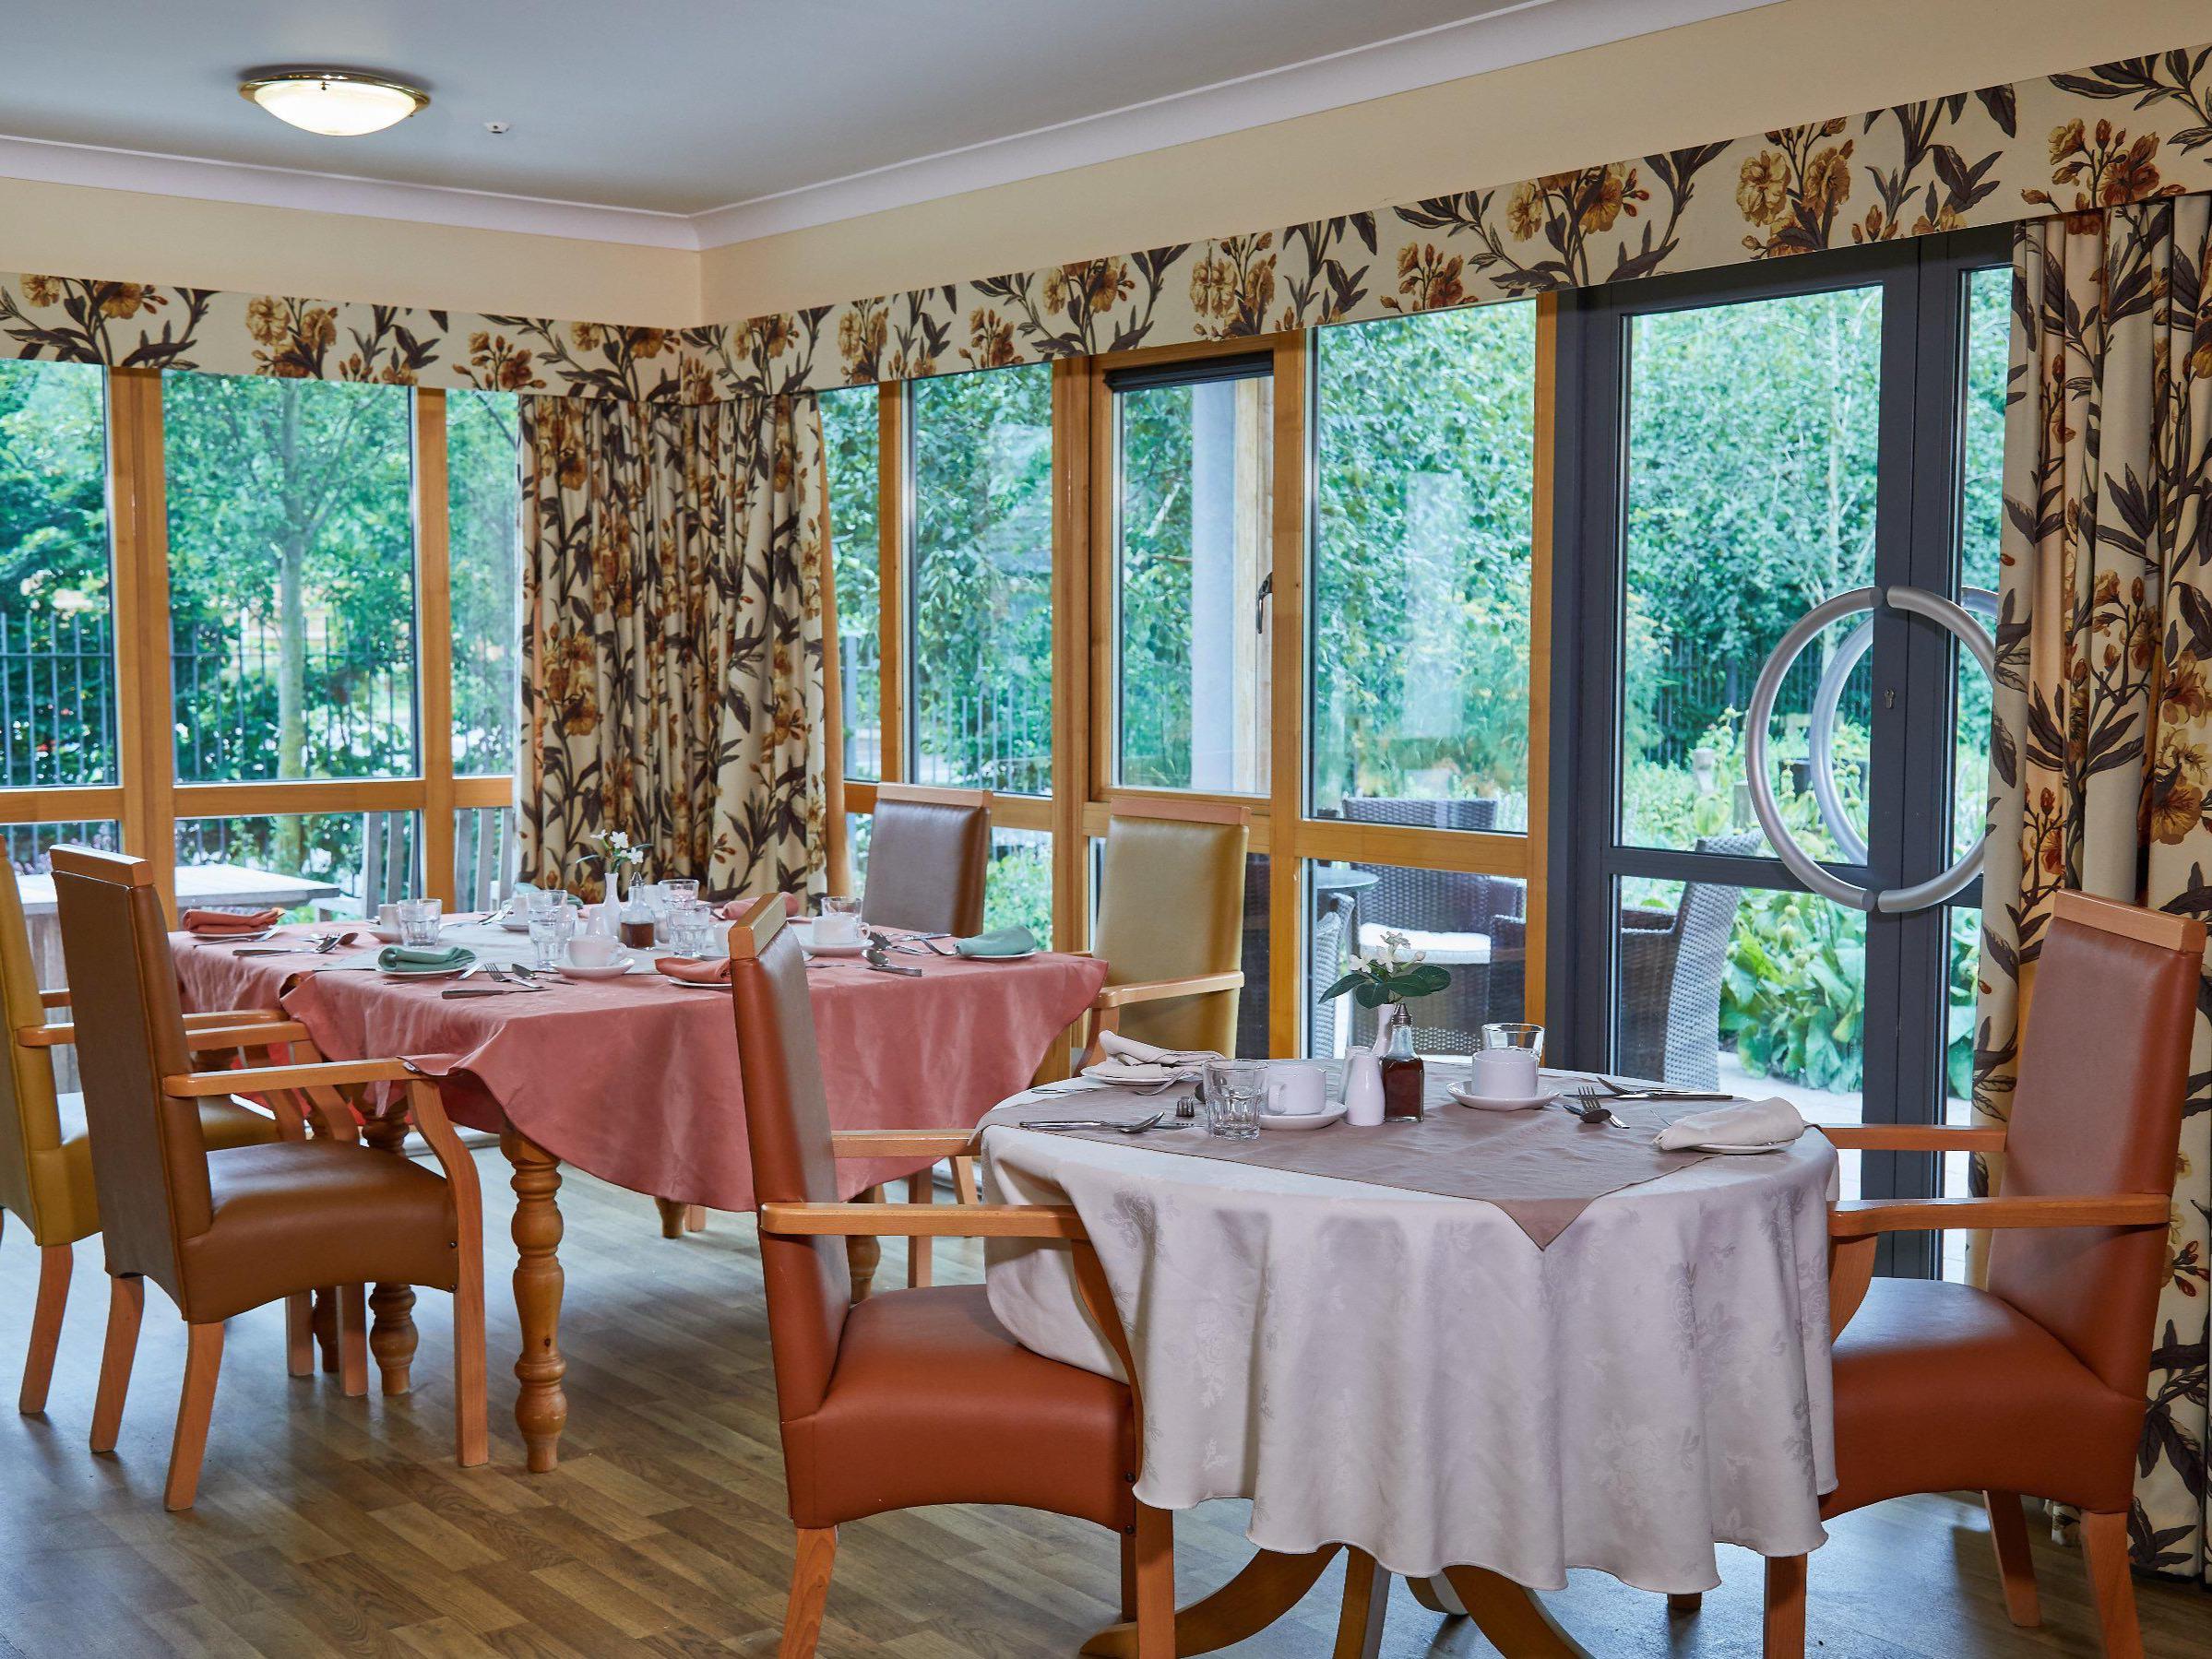 Images Barchester - Bluebell Park Care Home